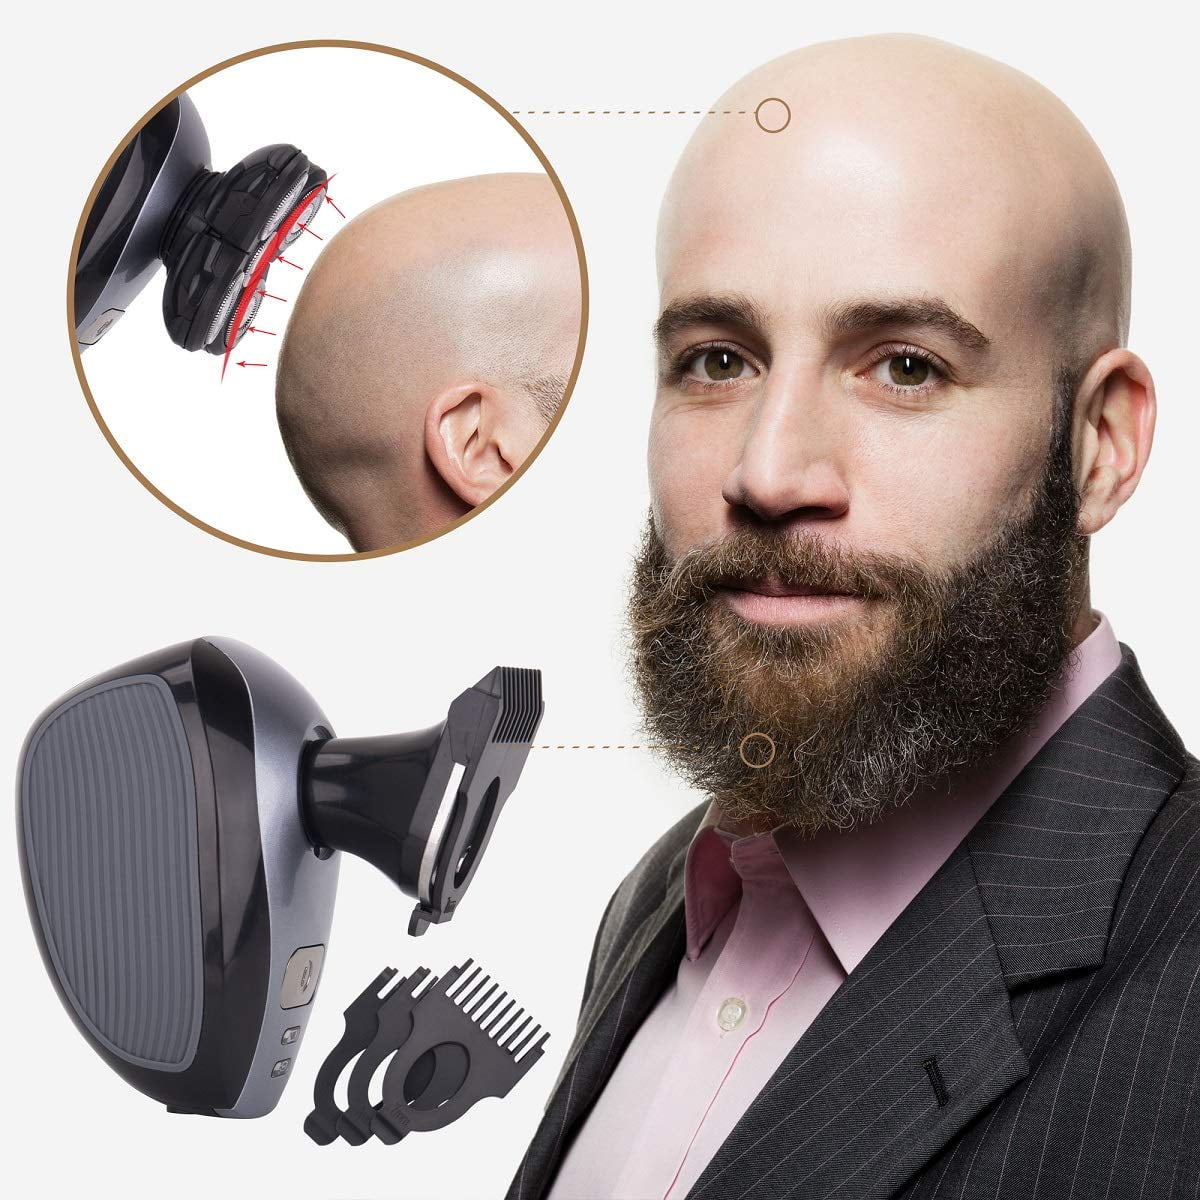 Xelparuc Men's 5-in-1 Electric Shaver  Grooming Kit: Five-Headed Beard,  Hair Razor for a Perfect Bald Look, Cordless and Rechargeable - Walmart.com